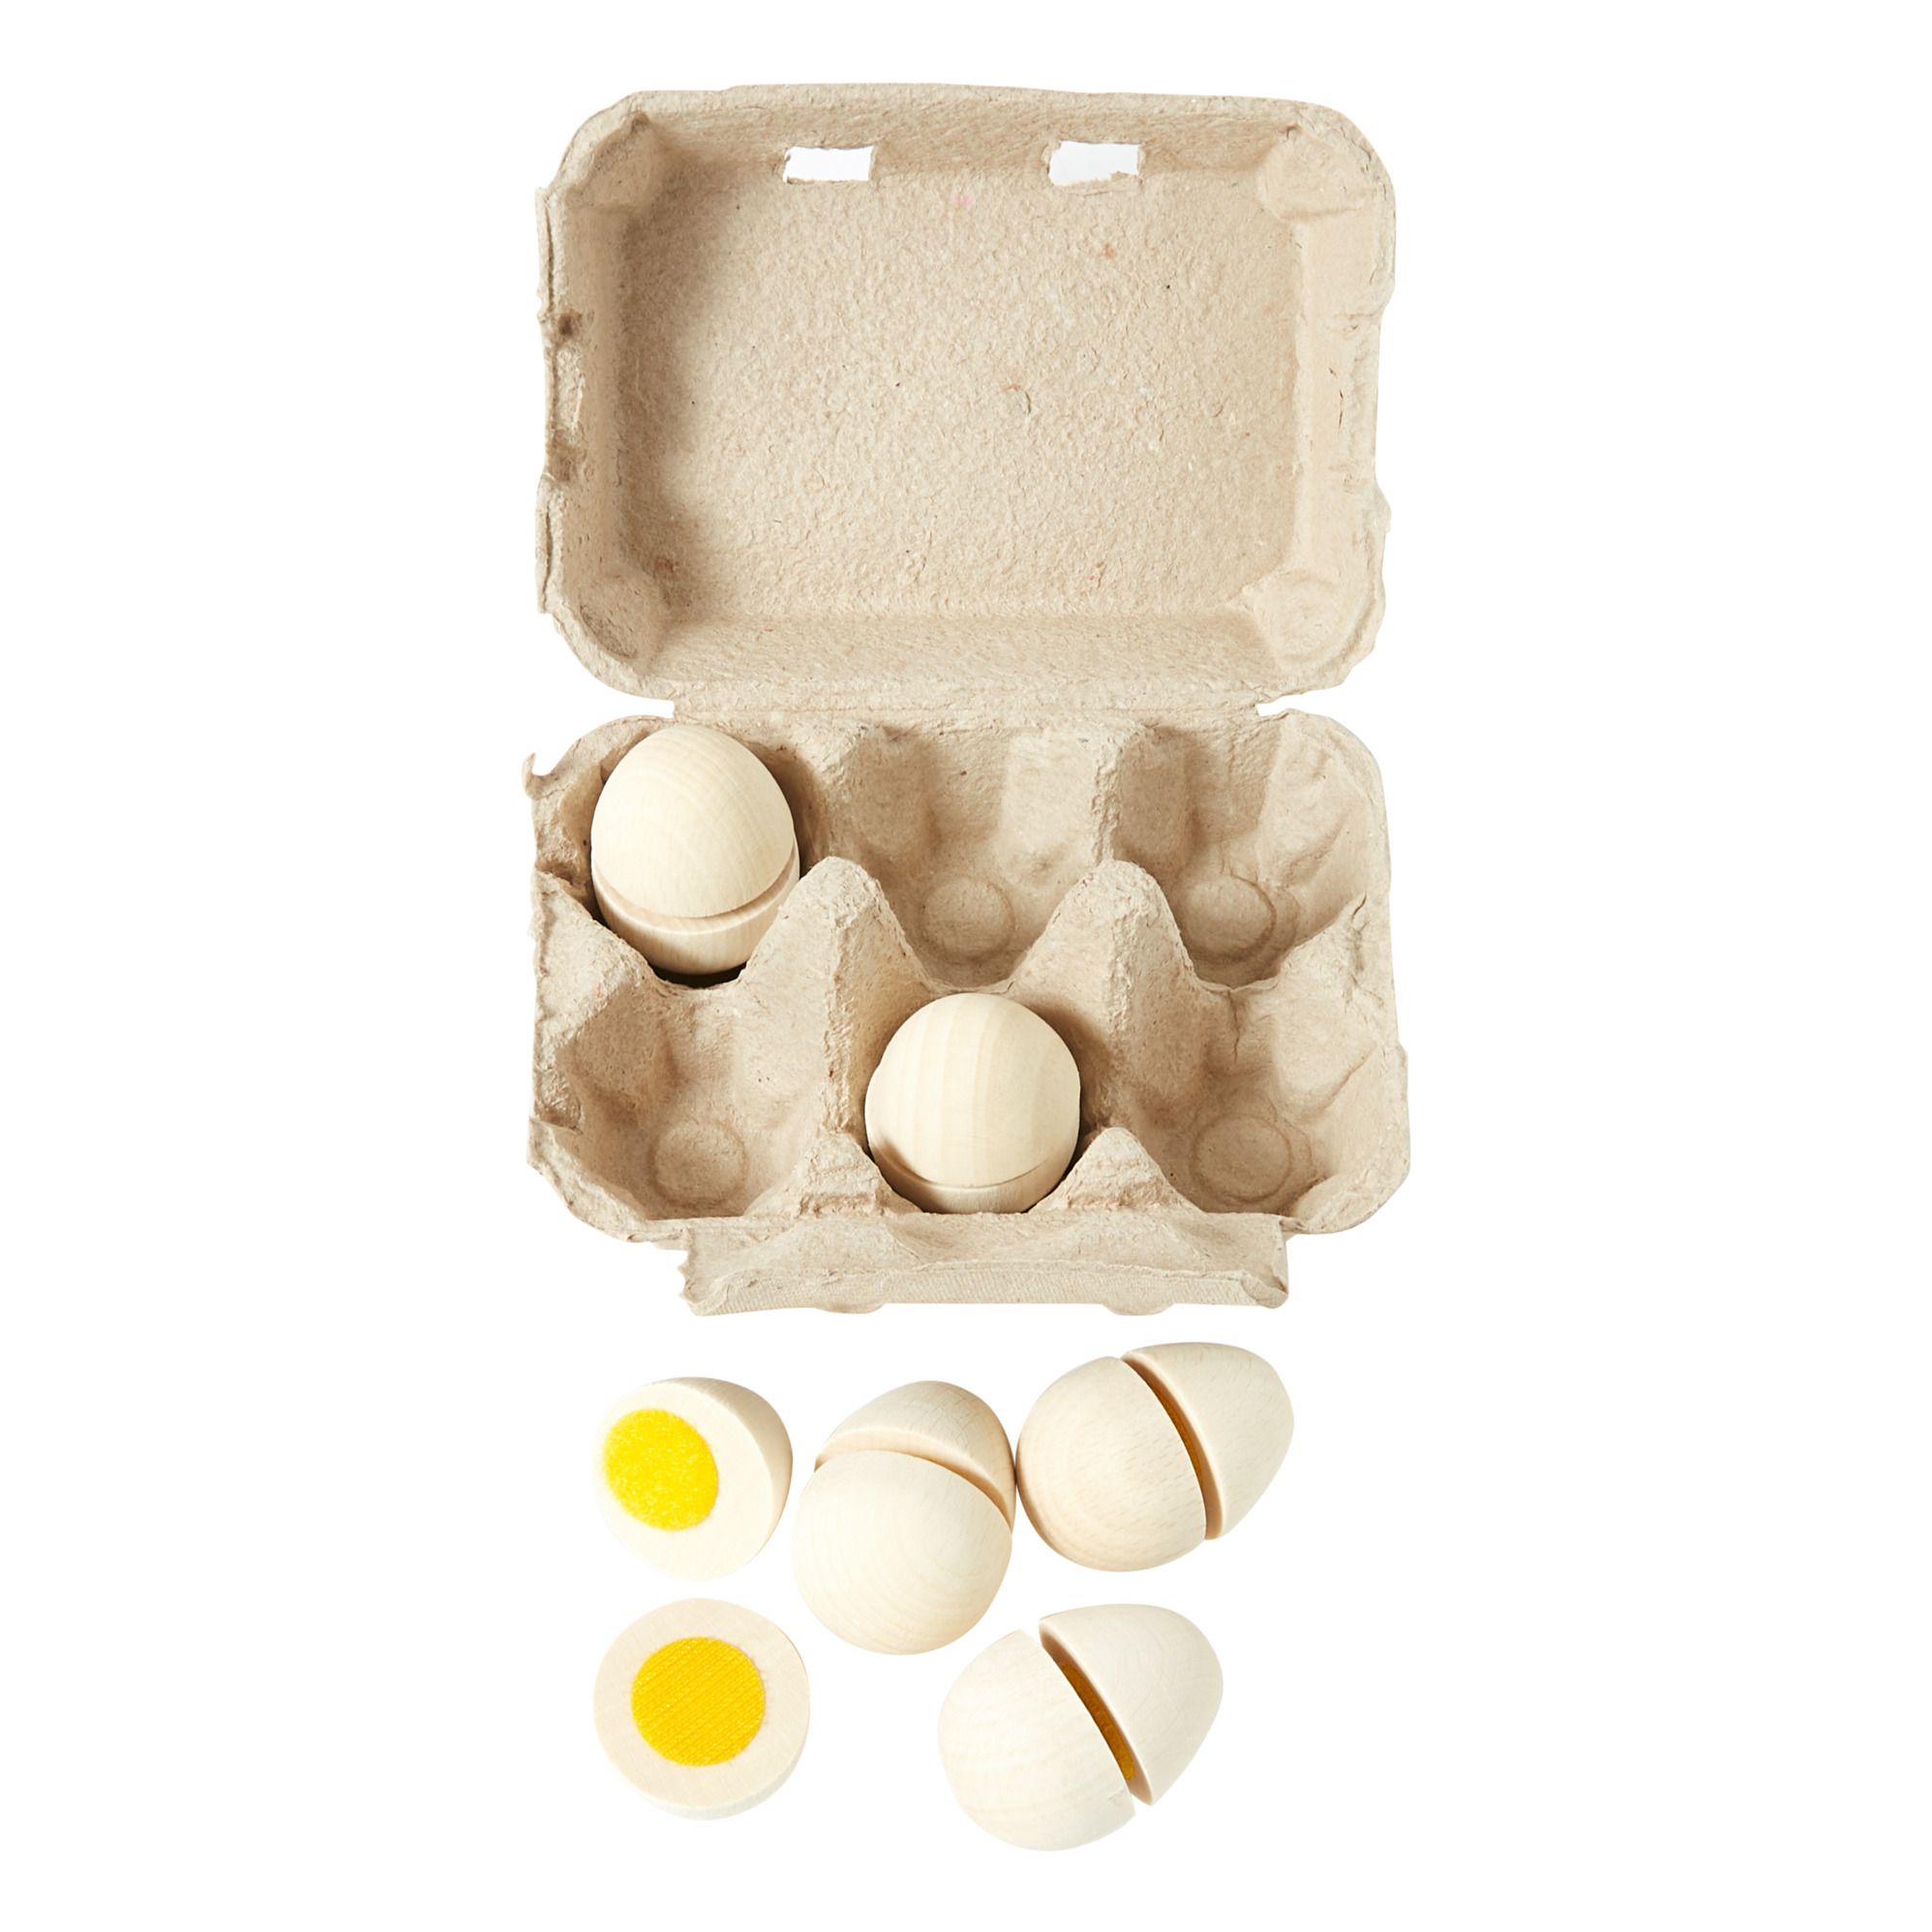 Erzi Pretend Play Wooden Grocery Shop Merchandise 6 Brown Eggs Made In Germany 